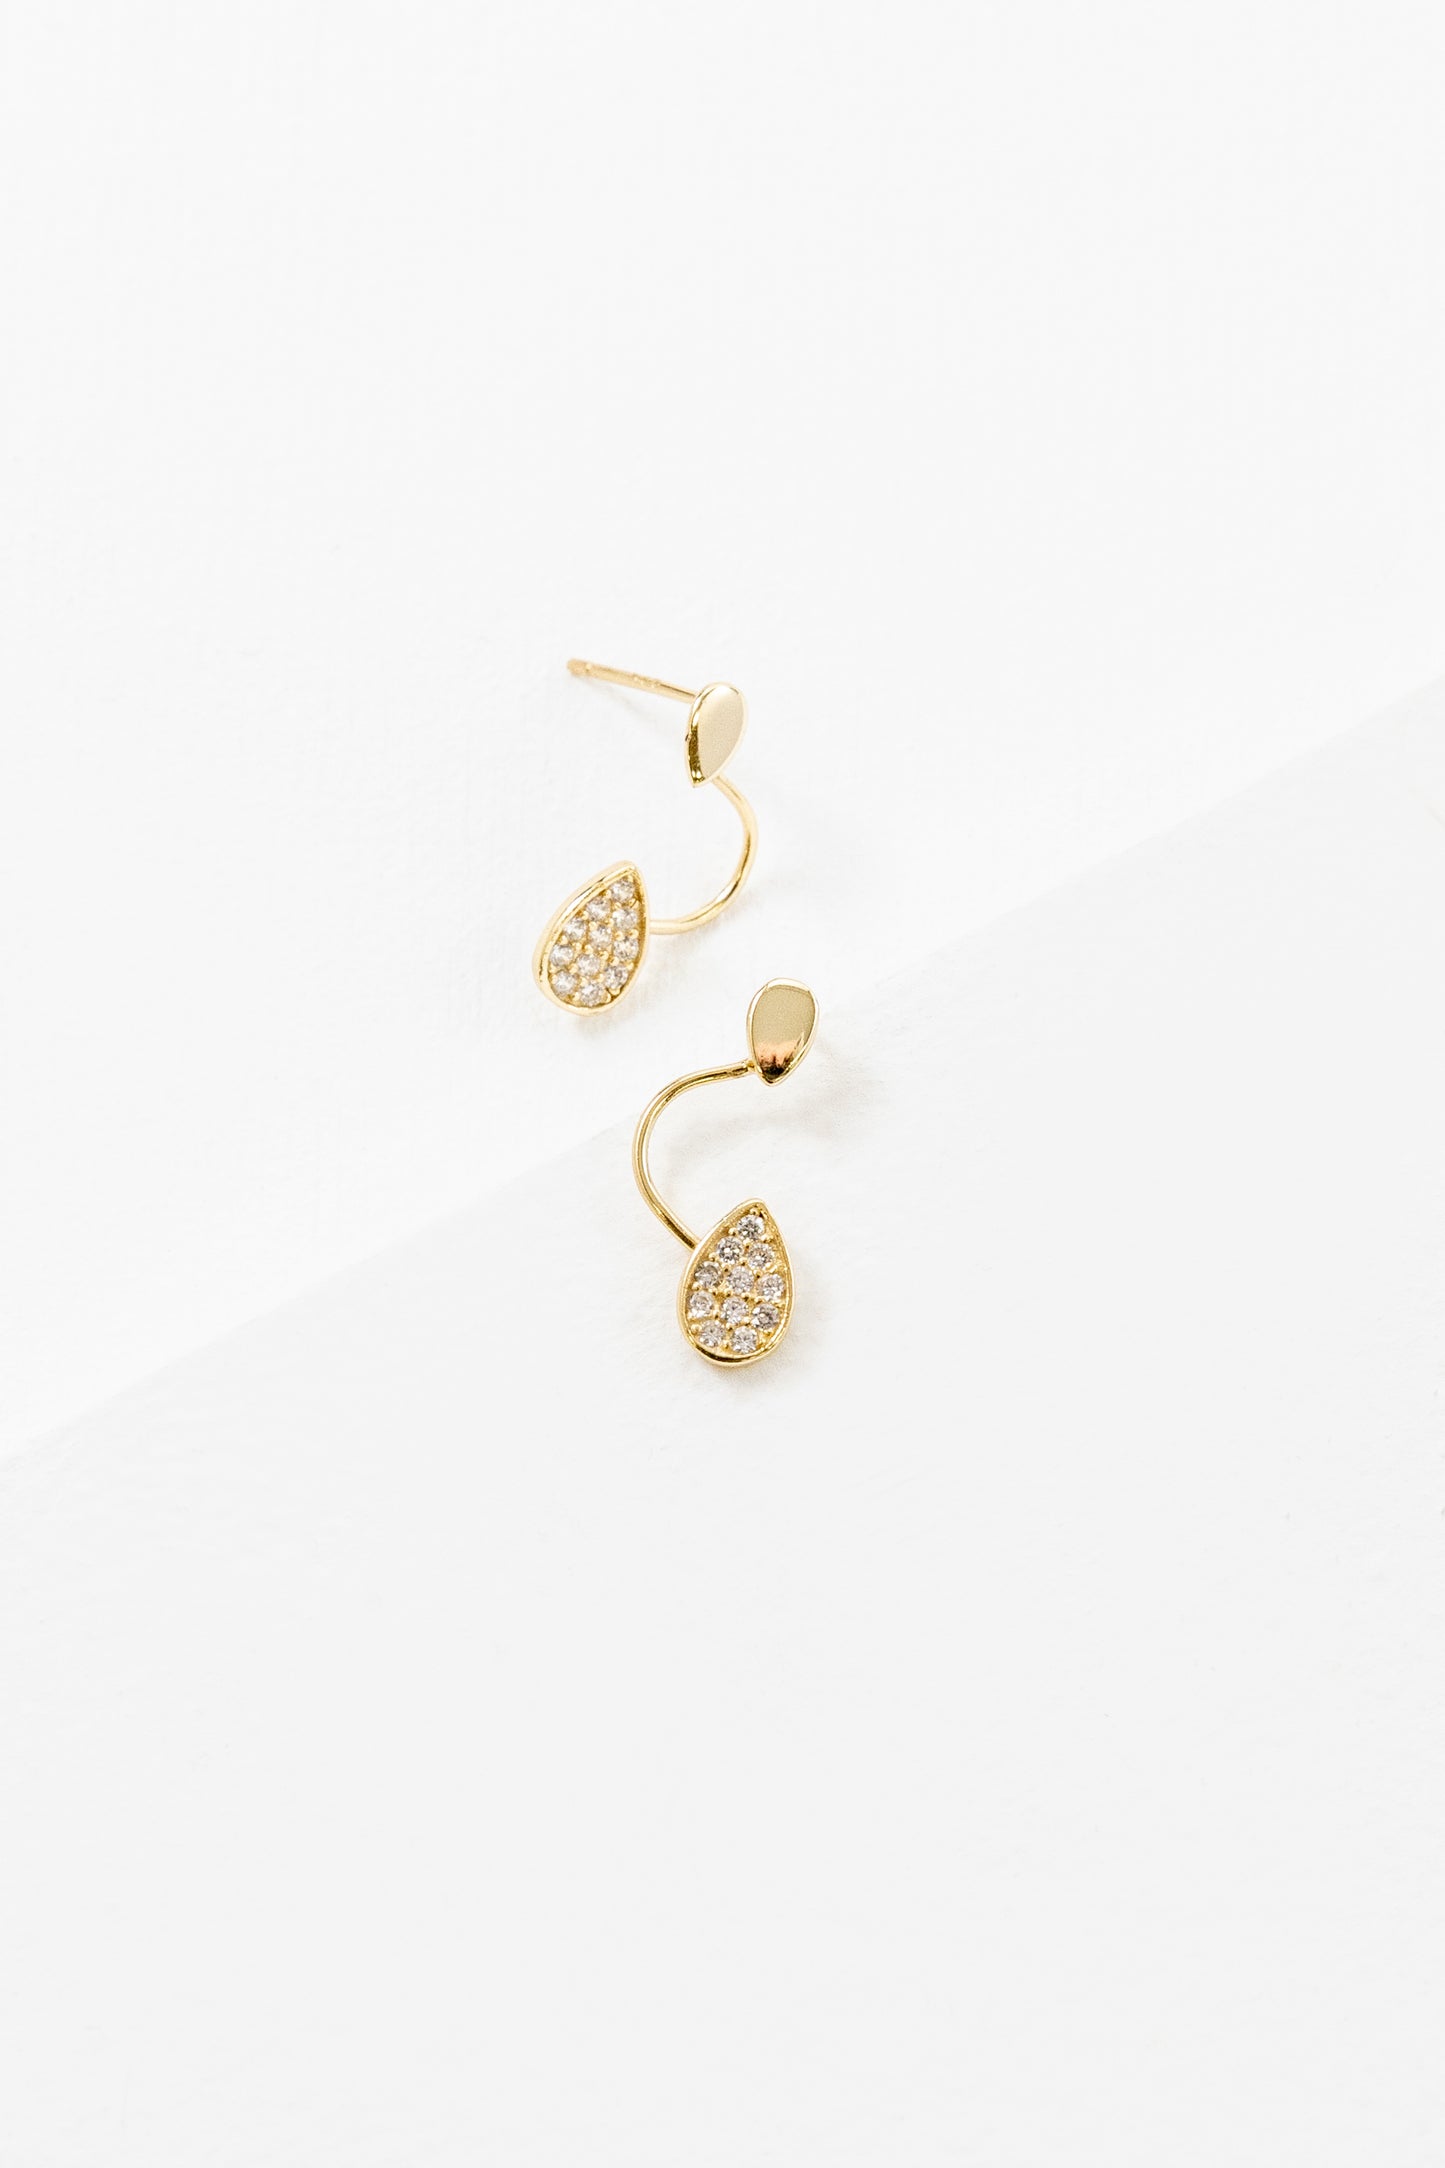 Curved Droplet Earrings (14K Gold)